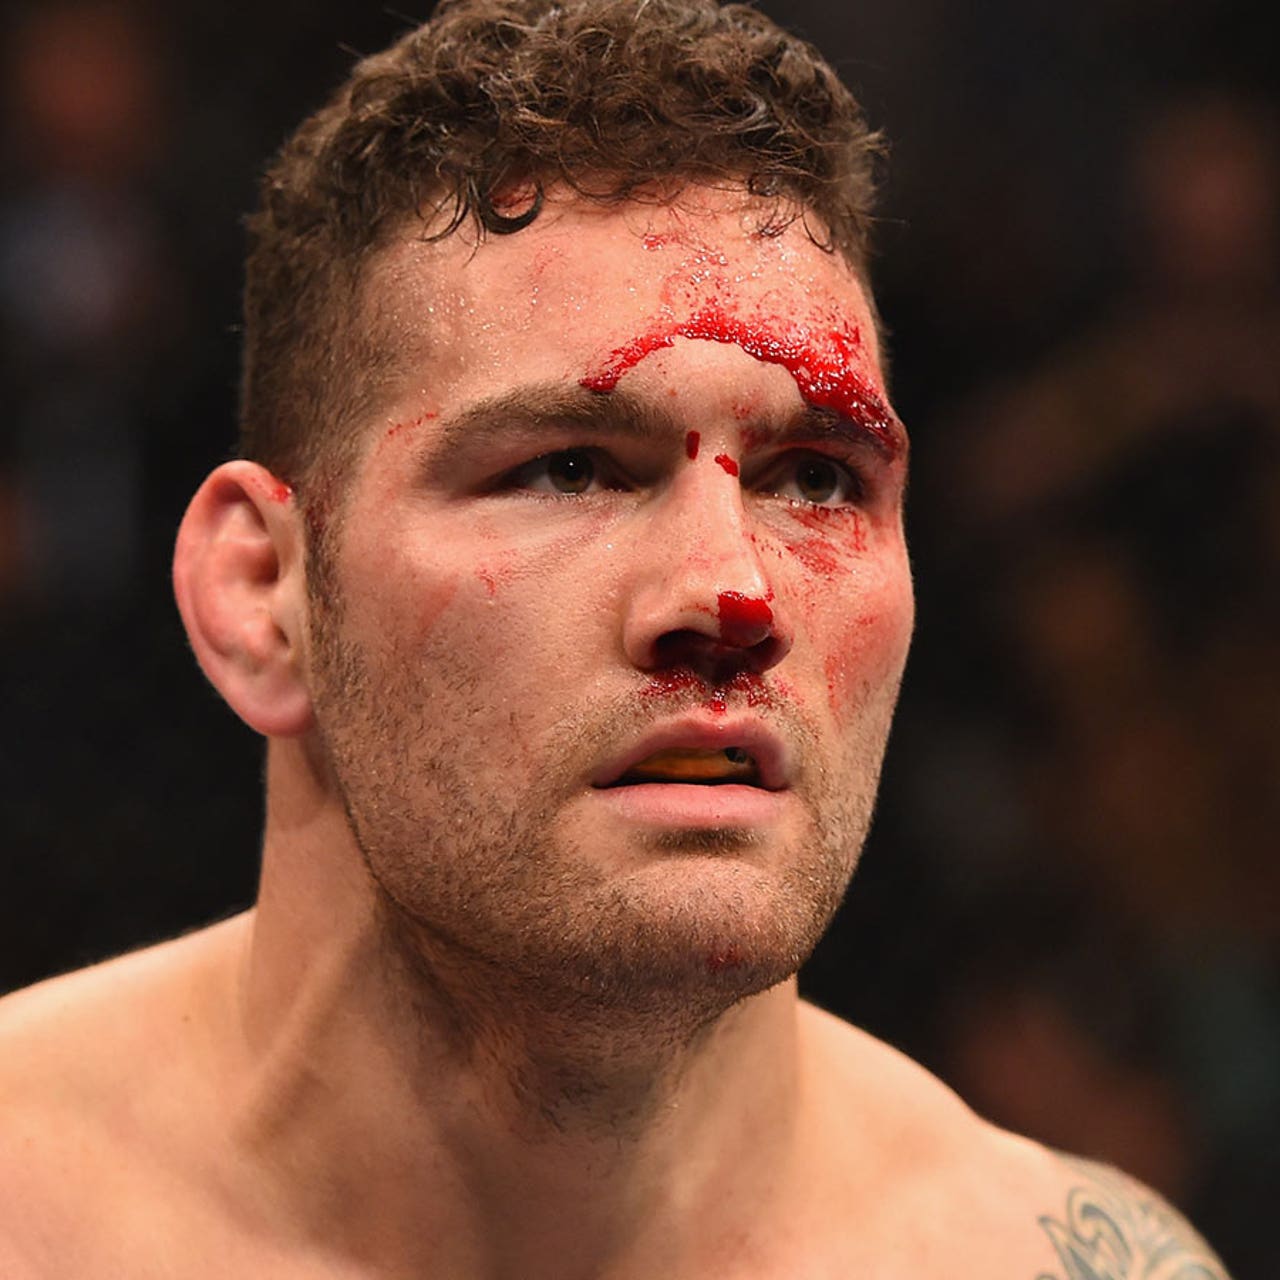 Chris Weidman details the injury that forced him out of UFC 199